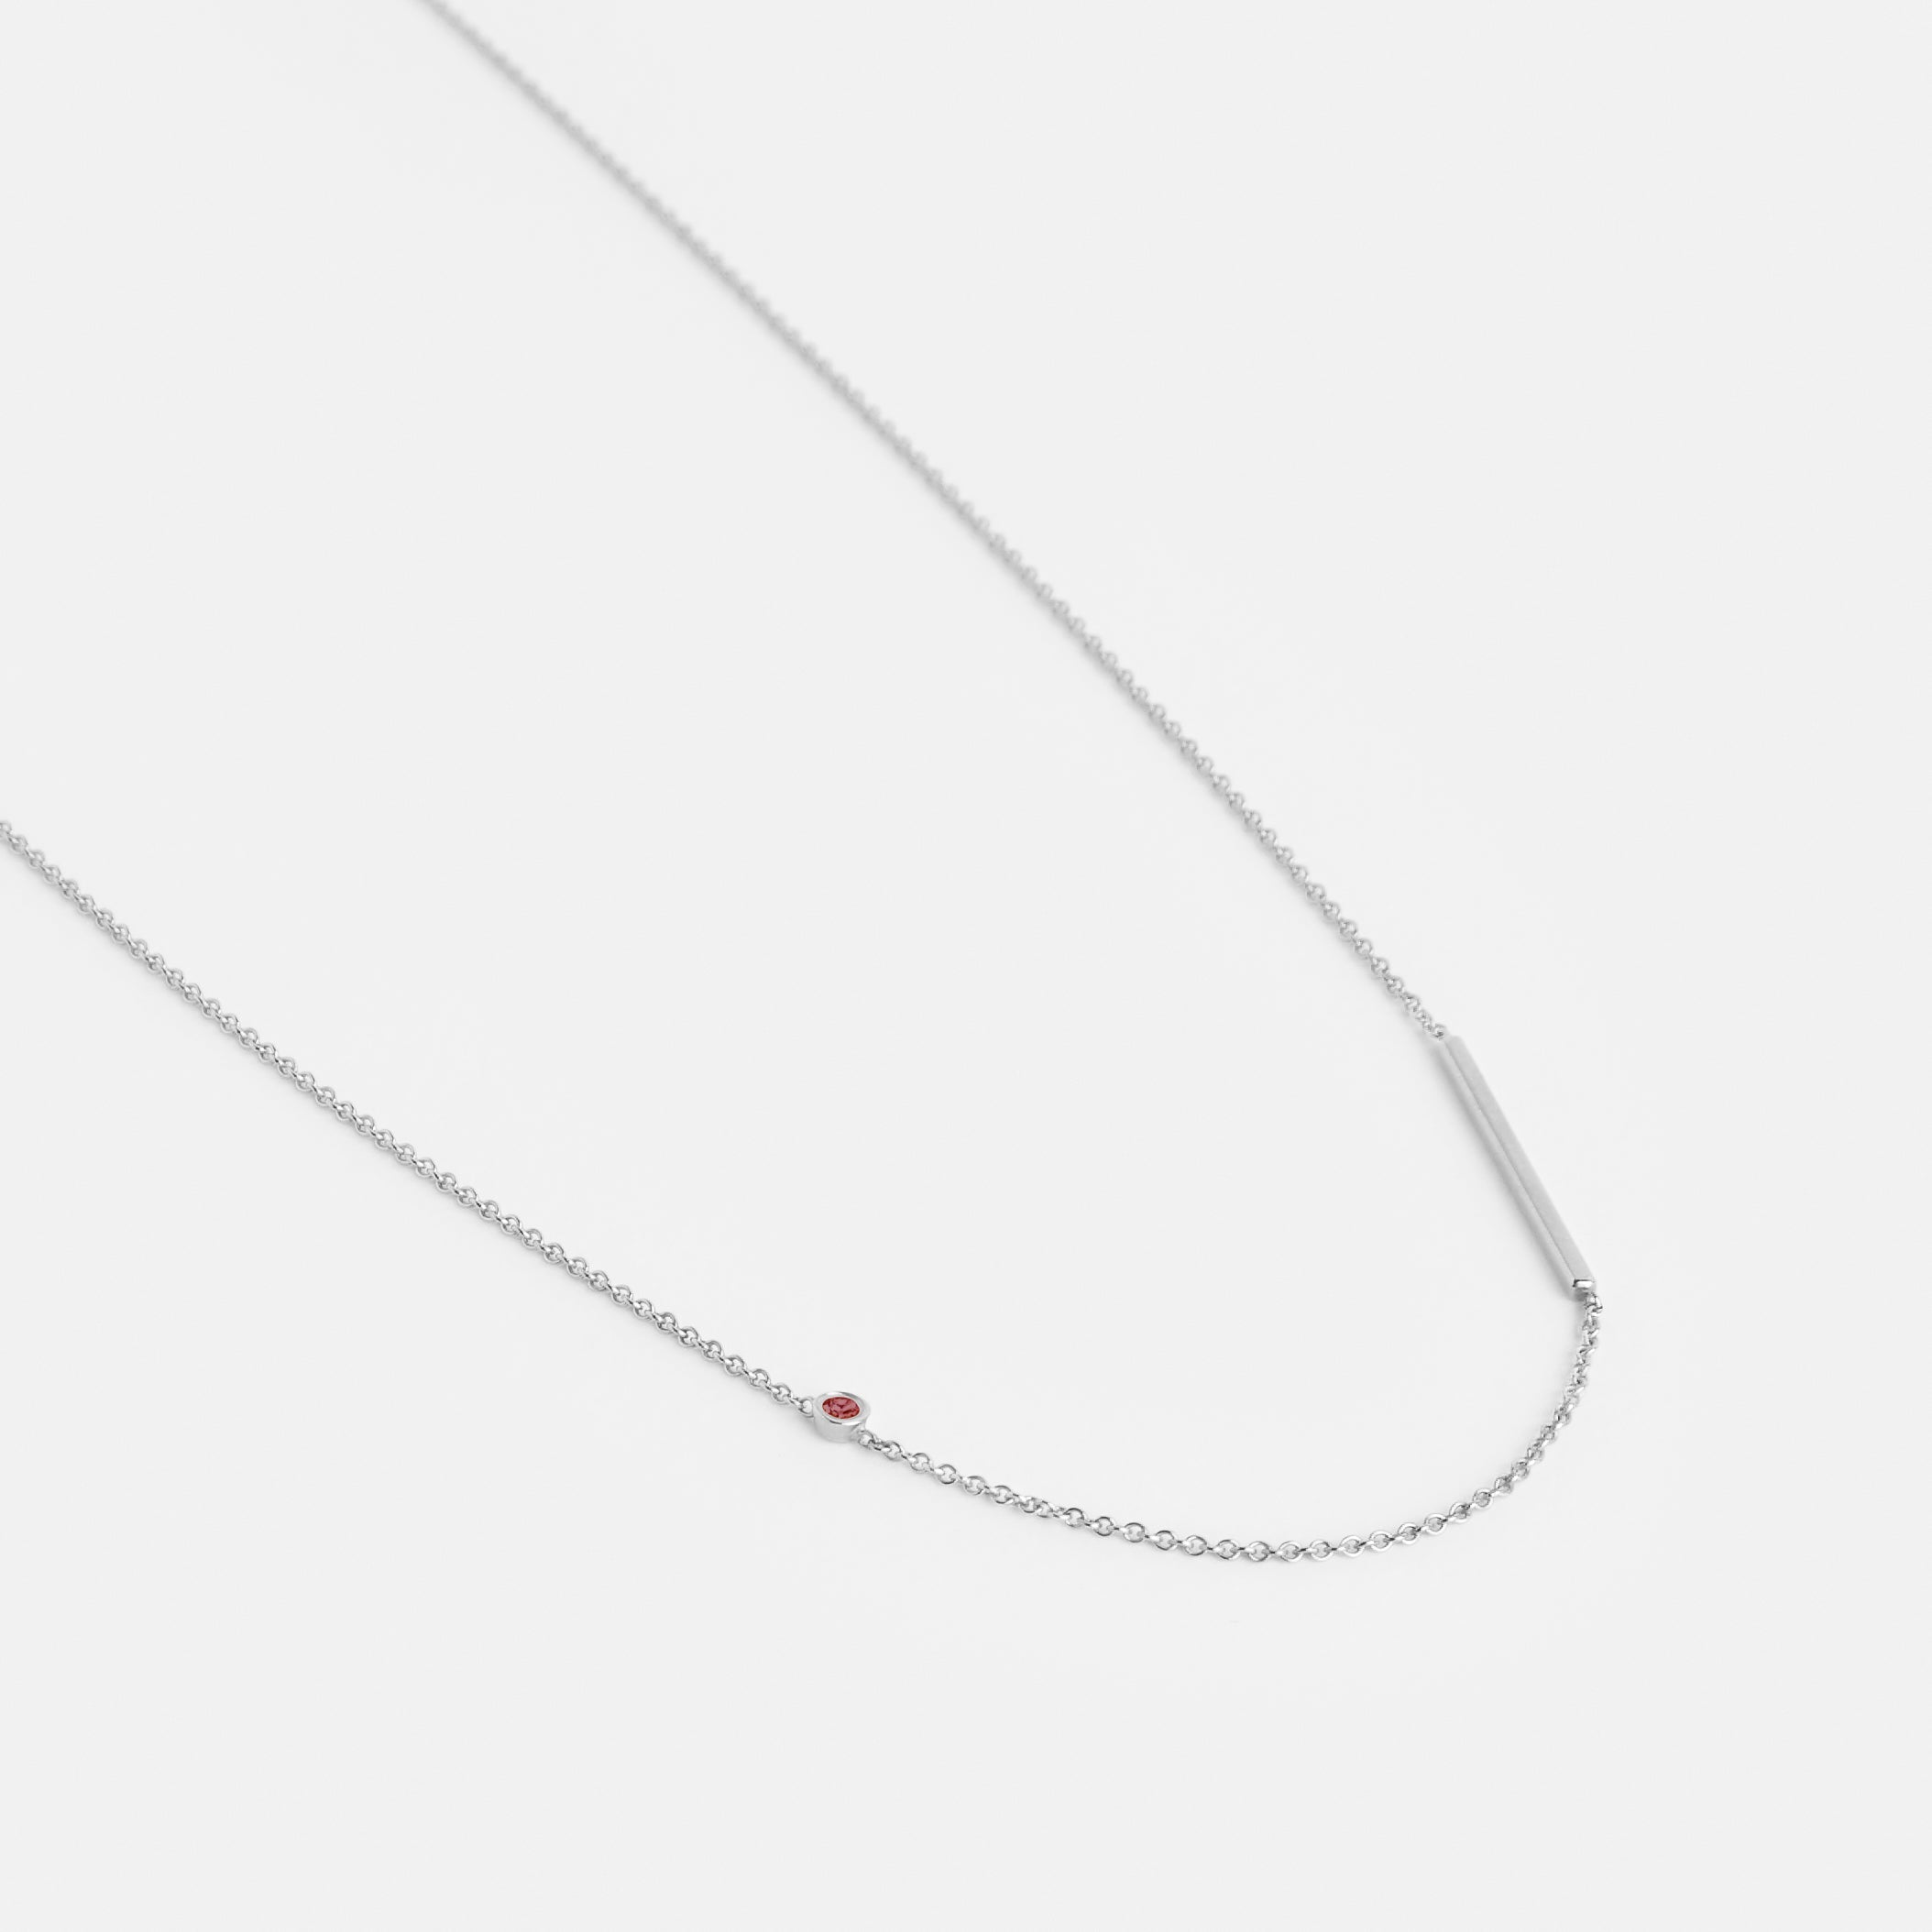 Iki Alternative Necklace in 14k White Gold set with Ruby By SHW Fine Jewelry NYC